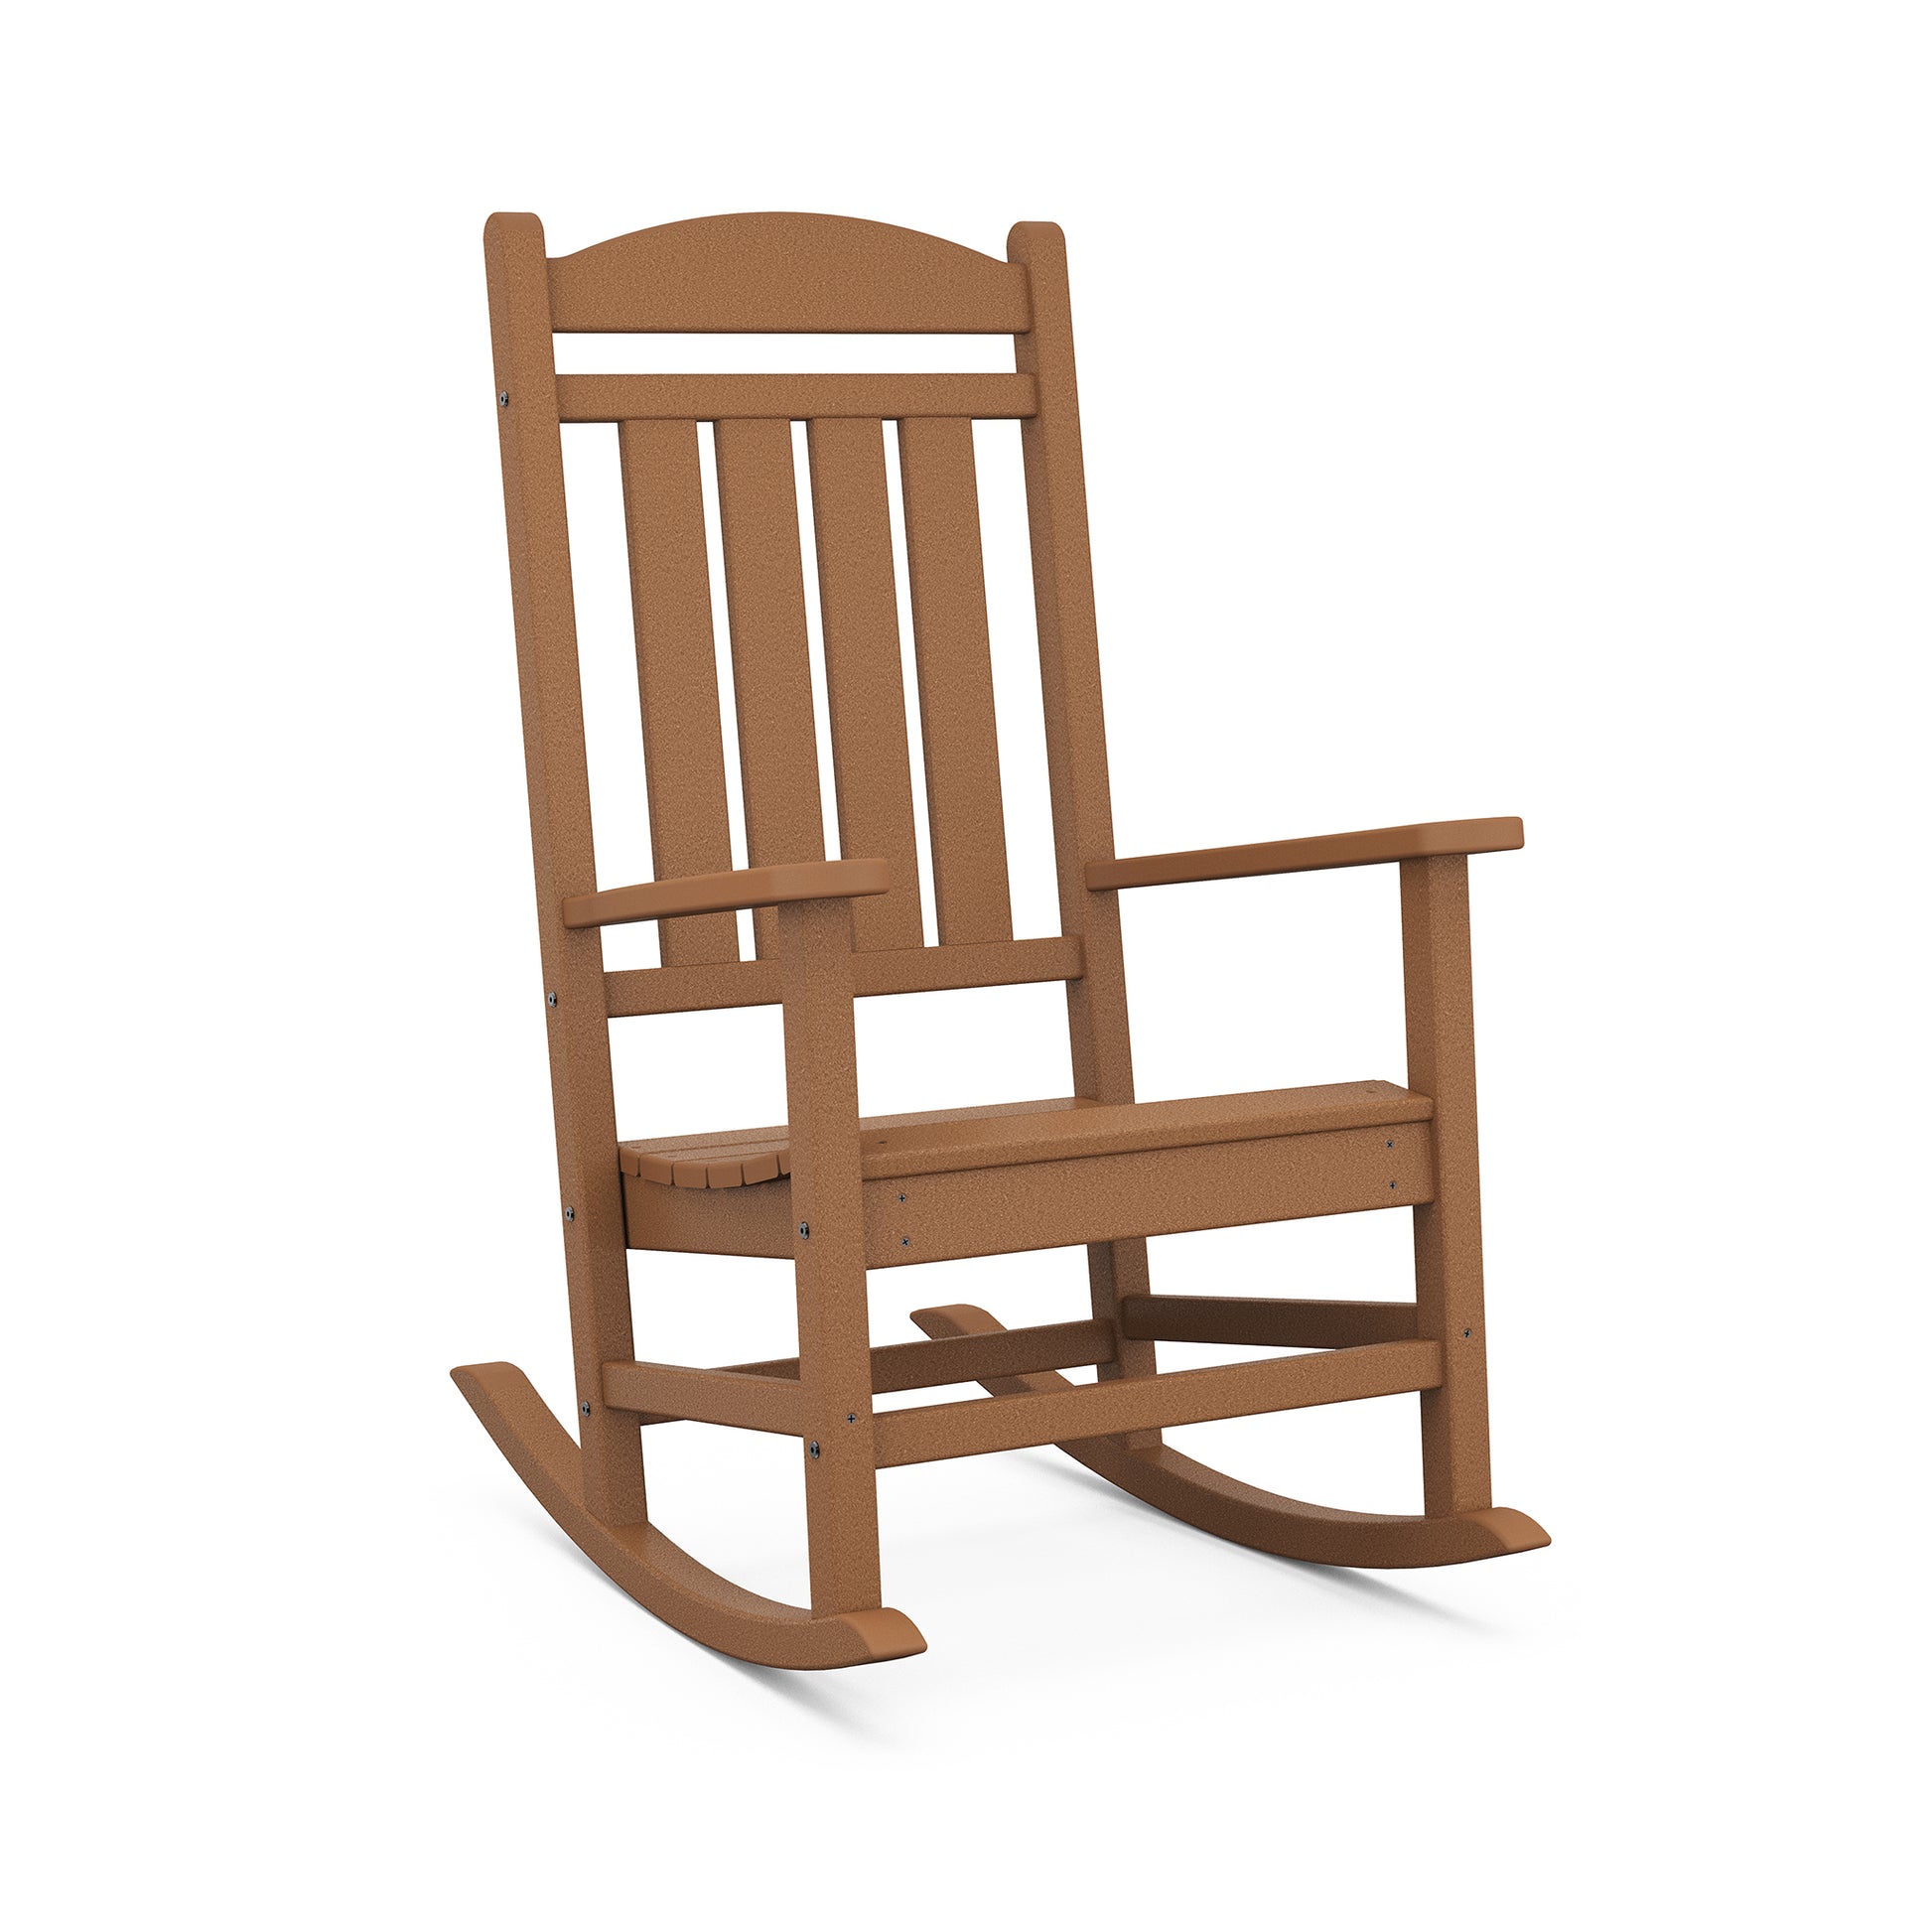 A traditional brown POLYWOOD Presidential Outdoor Rocking Chair with a vertical slat back and seat, standing on a simple rocker base, isolated on a white background.